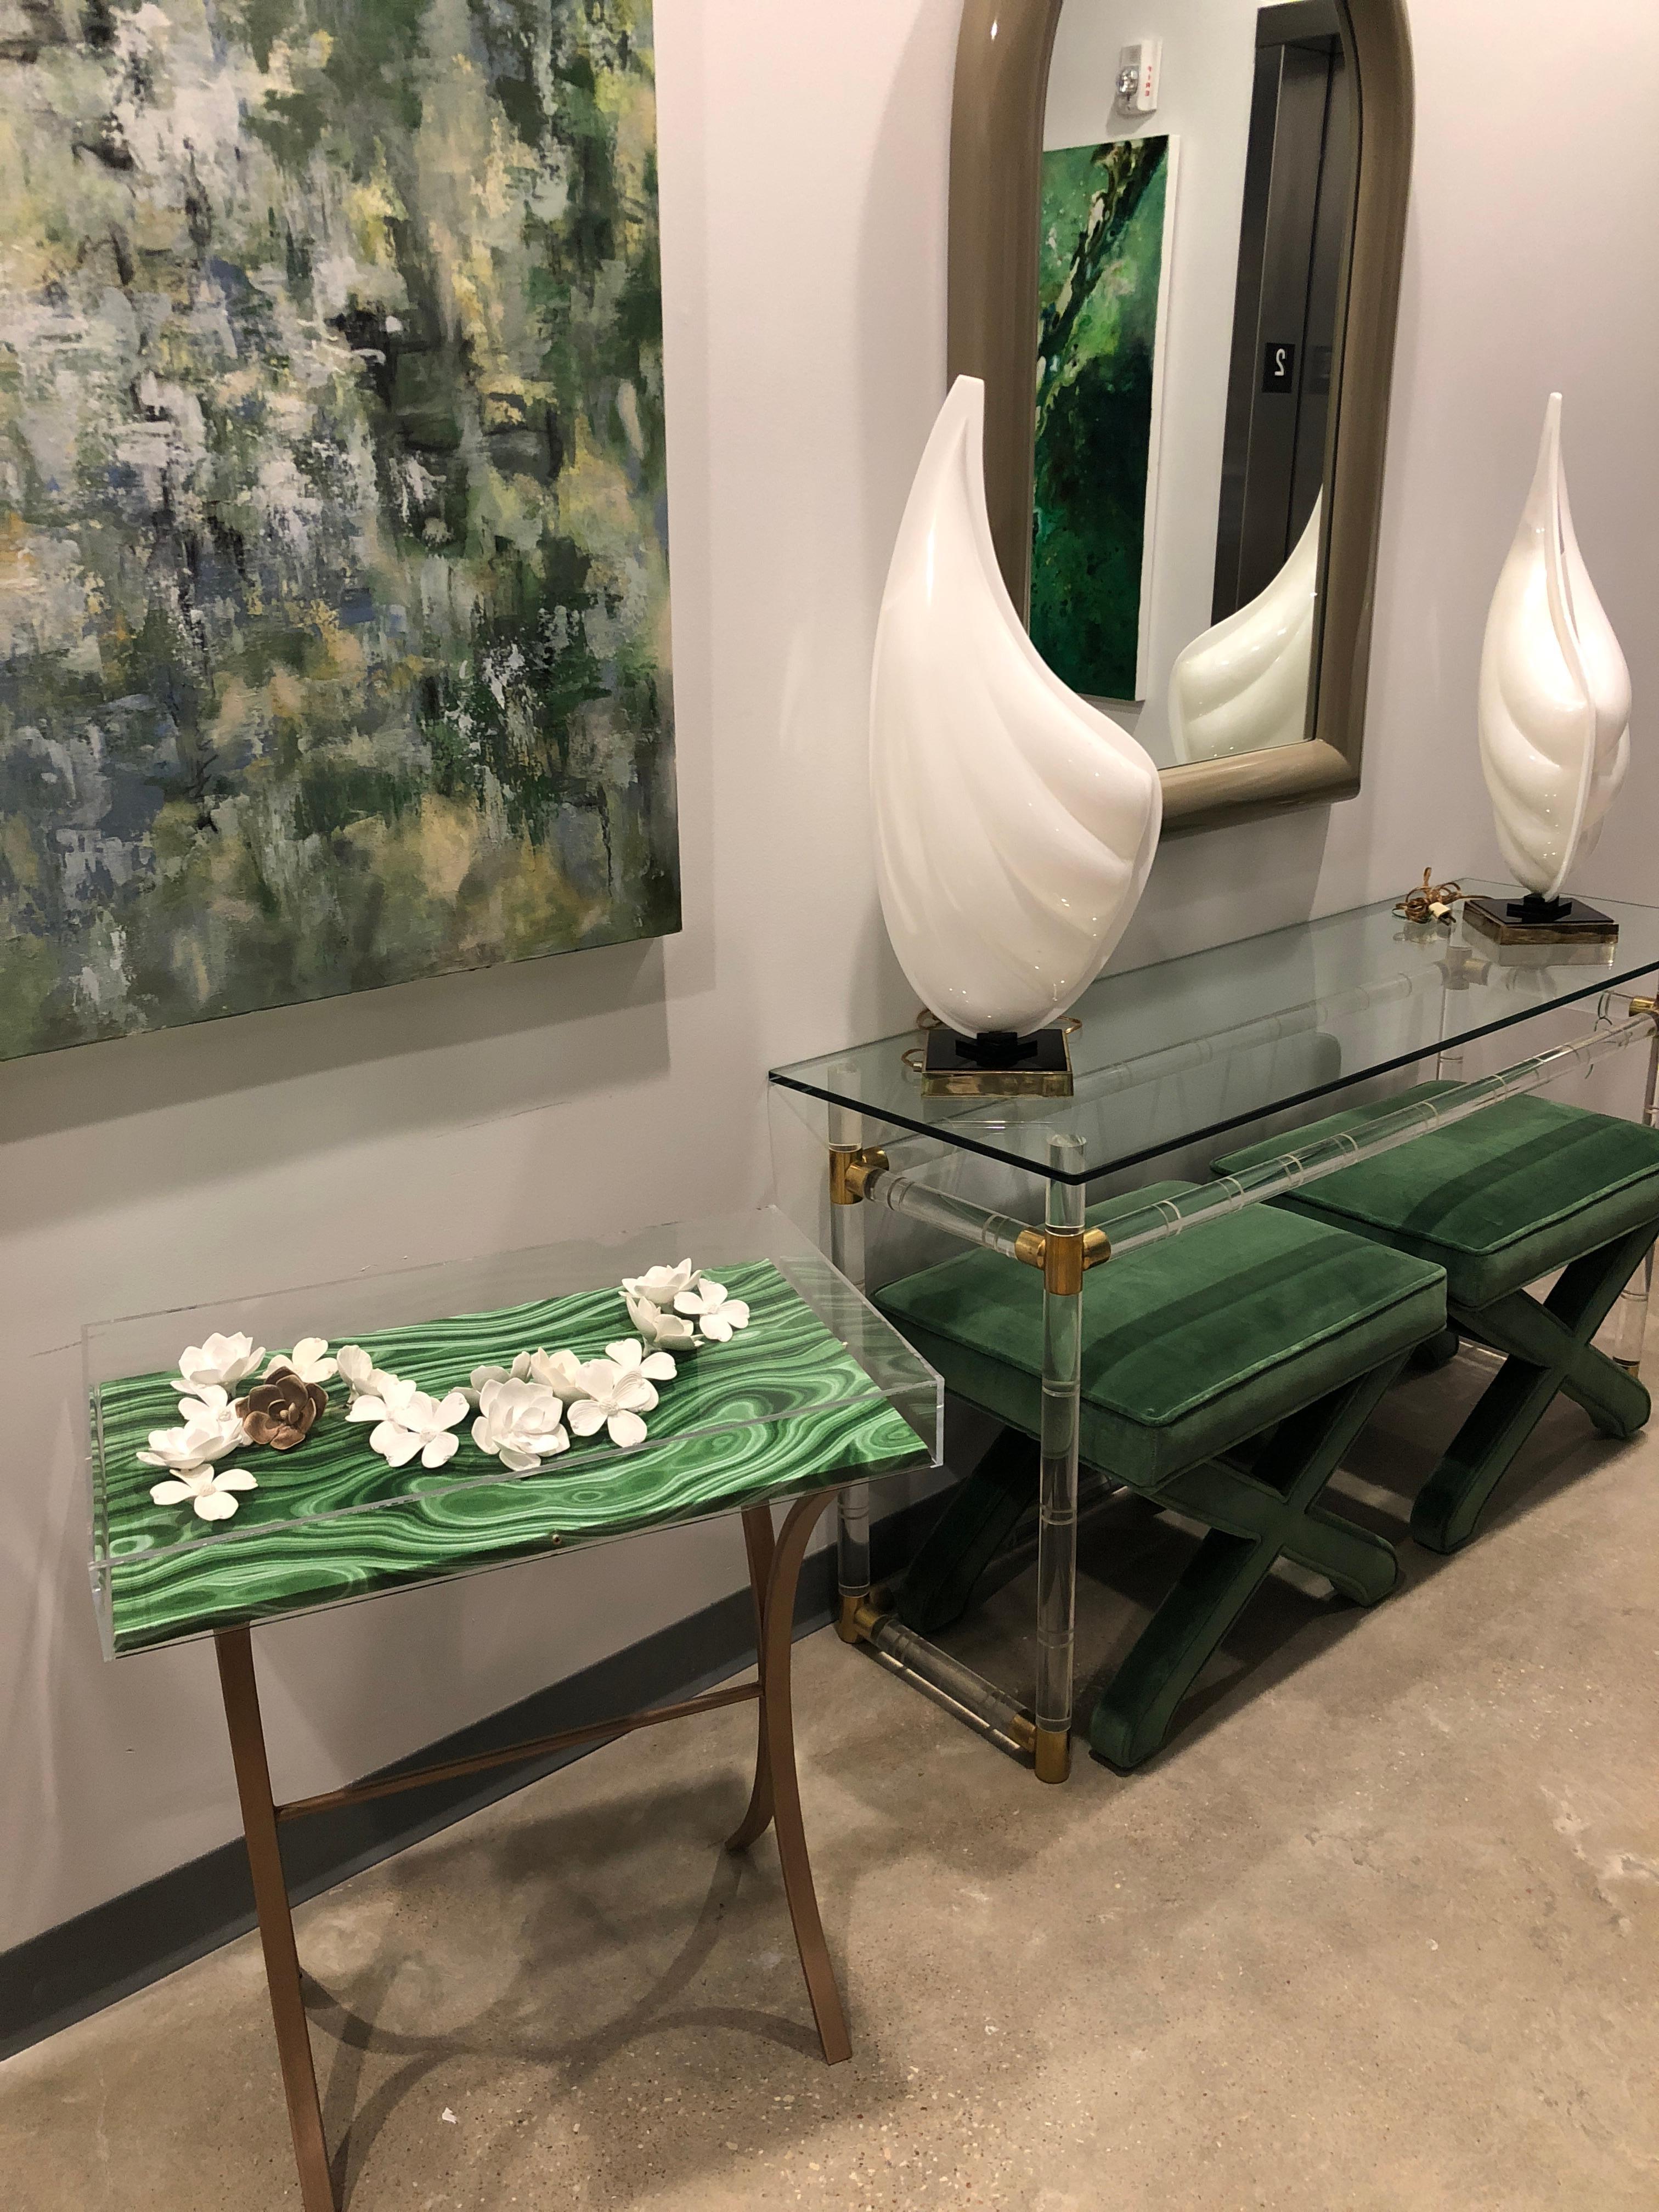 Mrspk&oz is thrilled to debut our very own Lucite objet d'art side table with a rose tone metal base. We create these fabulous pieces by using interesting objects and by choosing color with an intention that are then carefully curated in a Lucite